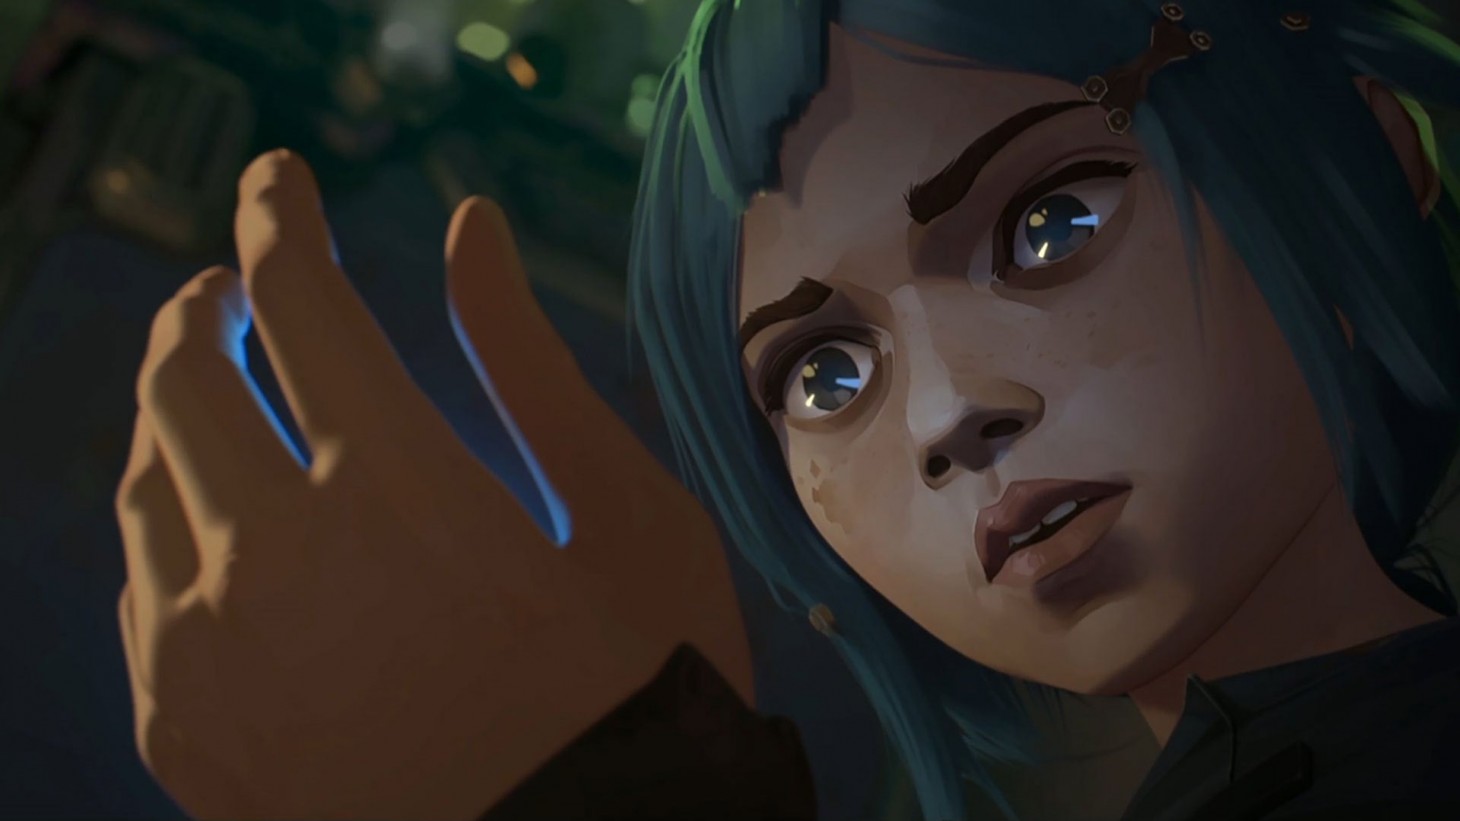 Riot releases clip from upcoming League of Legends animated series, Arcane  - Dot Esports